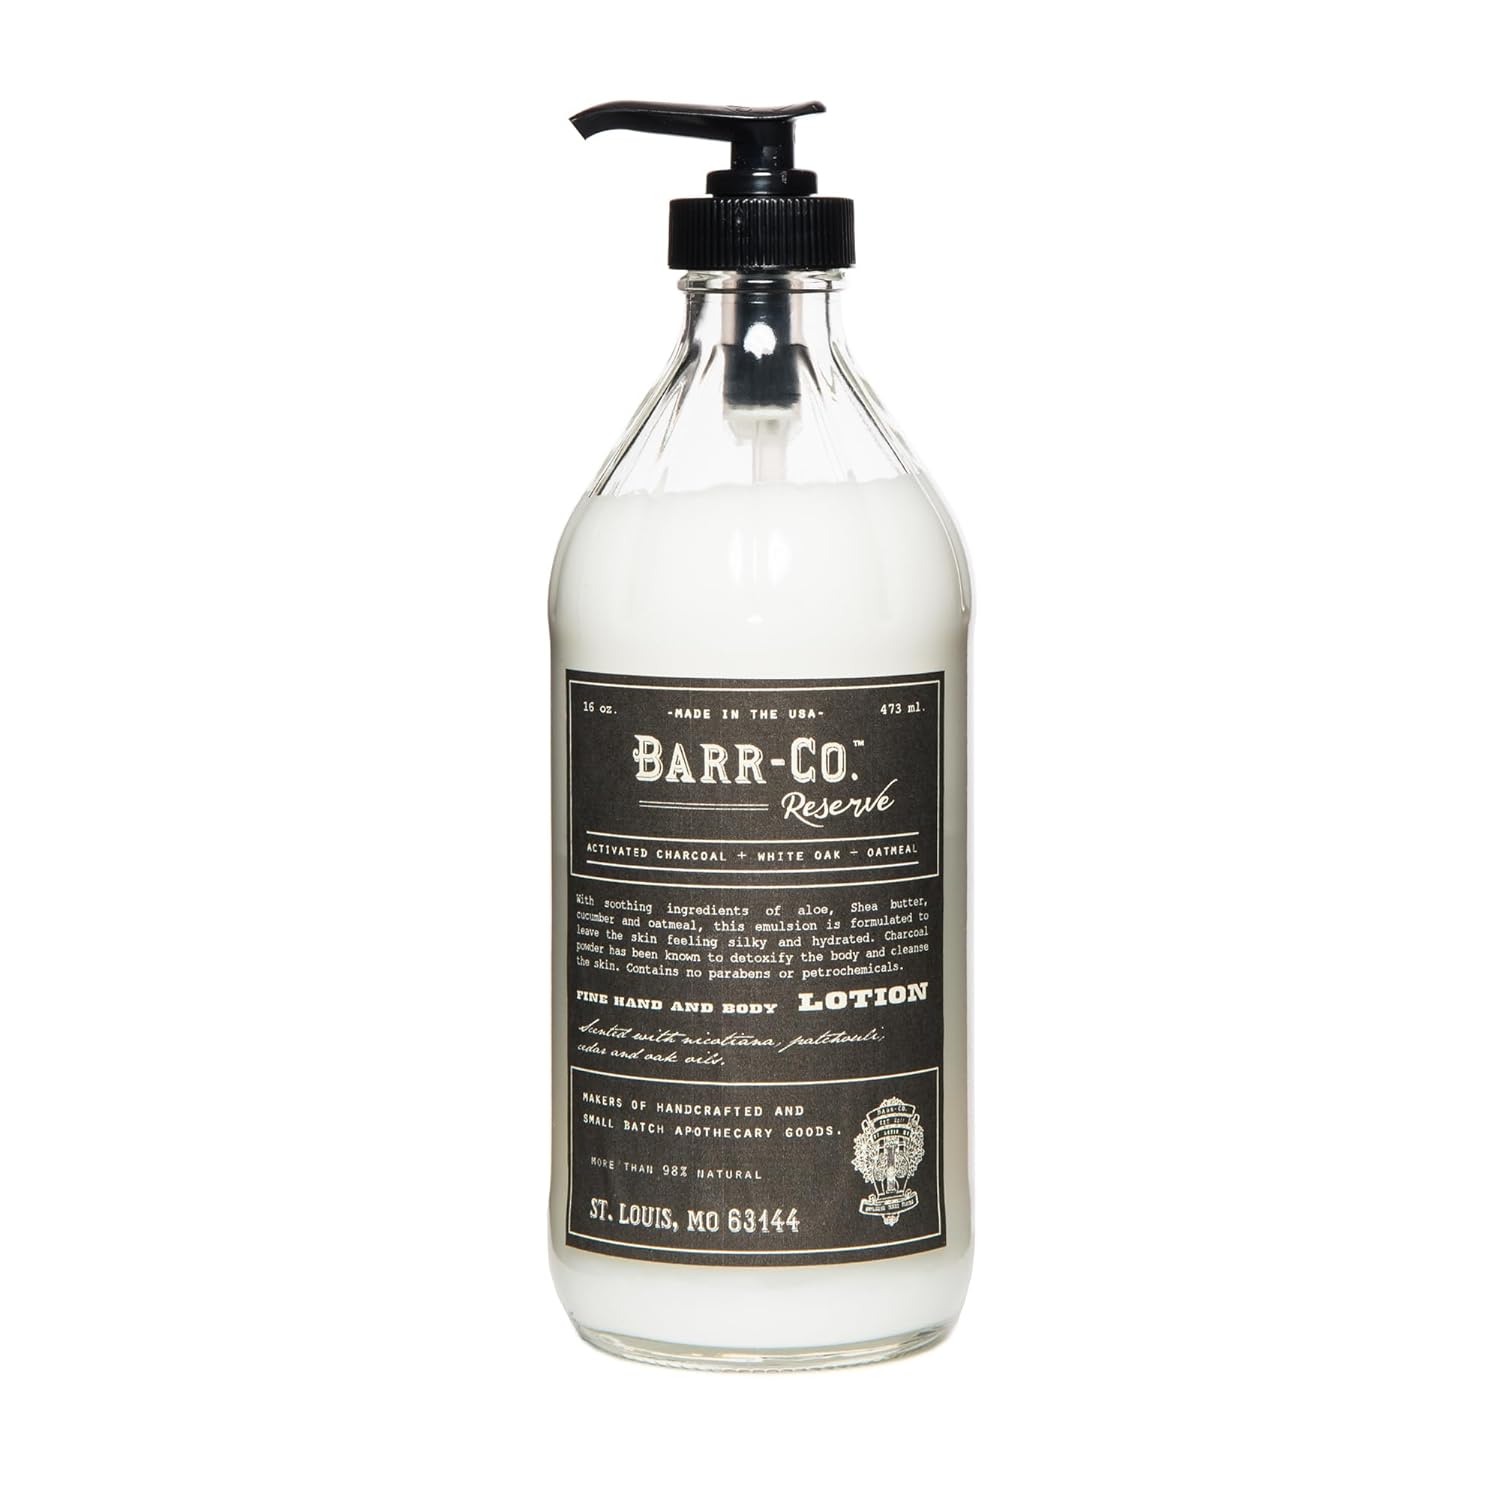 BARR-CO. Reserve Scent Shea Butter Lotion, Earthy Tobacco Scent with Woody Notes, Shea Moisturizing Lotion for Sensitive Skin, 16